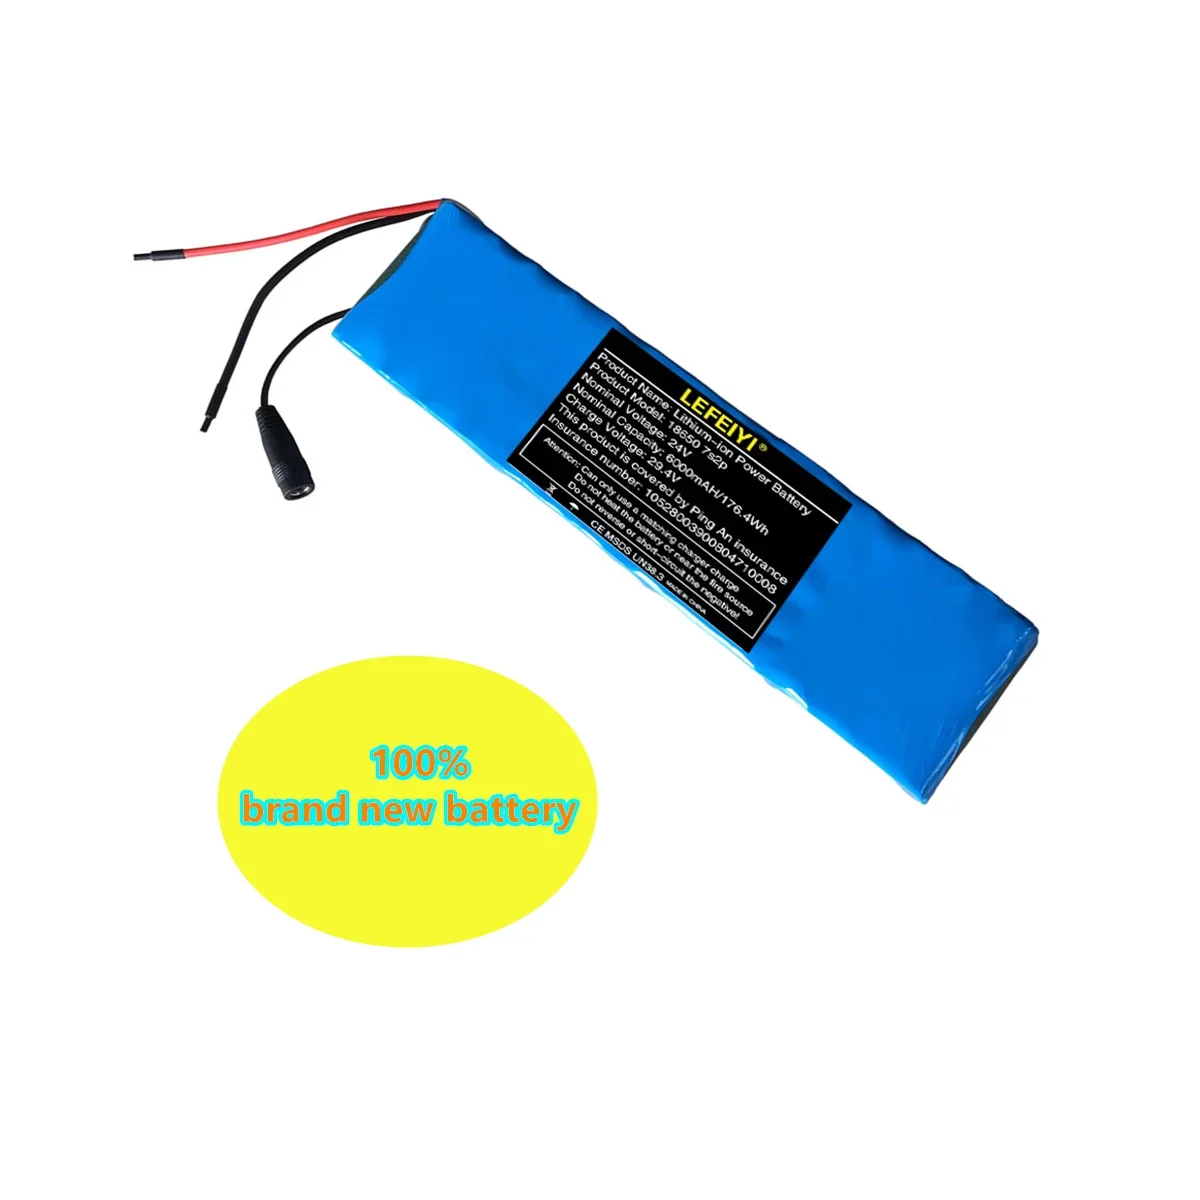 

24-29.4V 6Ah 7S2P 18650 Li-ion Rechargeable Battery Pack 29.4v 6000mAH for Electric Bicycle Moped Balancing Scooter